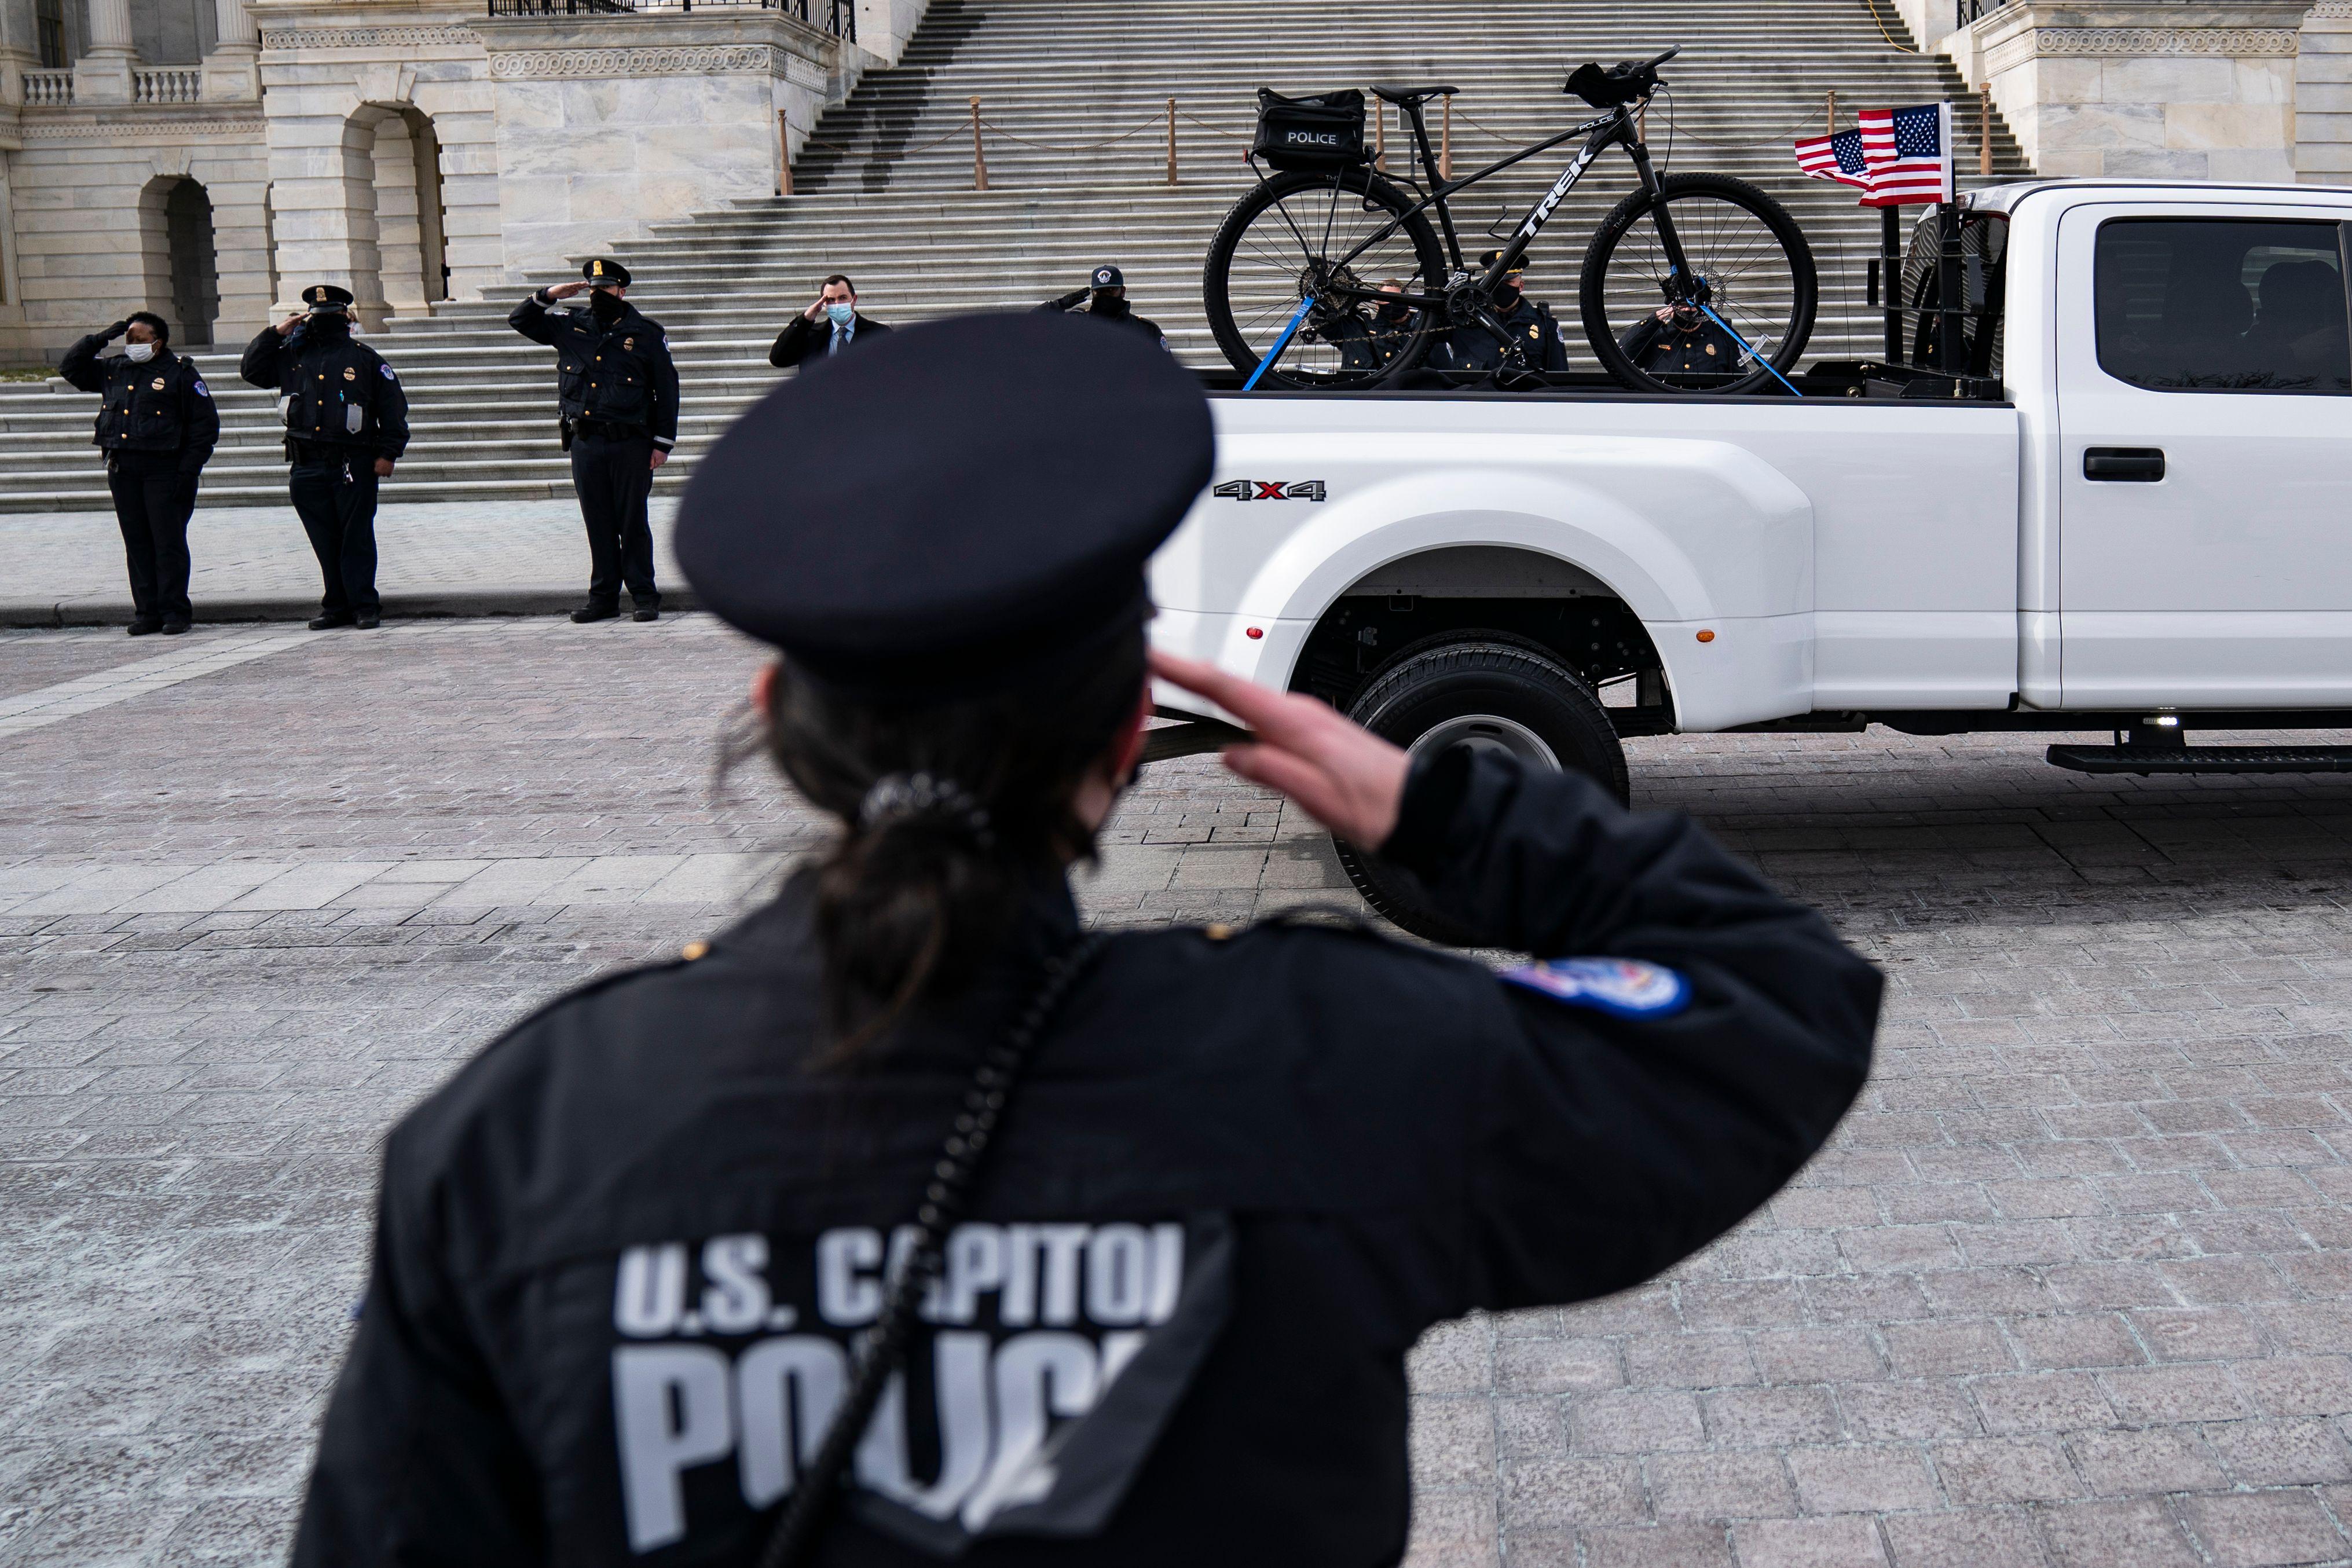 A U.S. Capitol Police office salutes at attention as a truck carrying the bike of US Capitol Police officer Brian Sicknick departs the US Capitol building on February 3, 2021, in Washington, D.C.